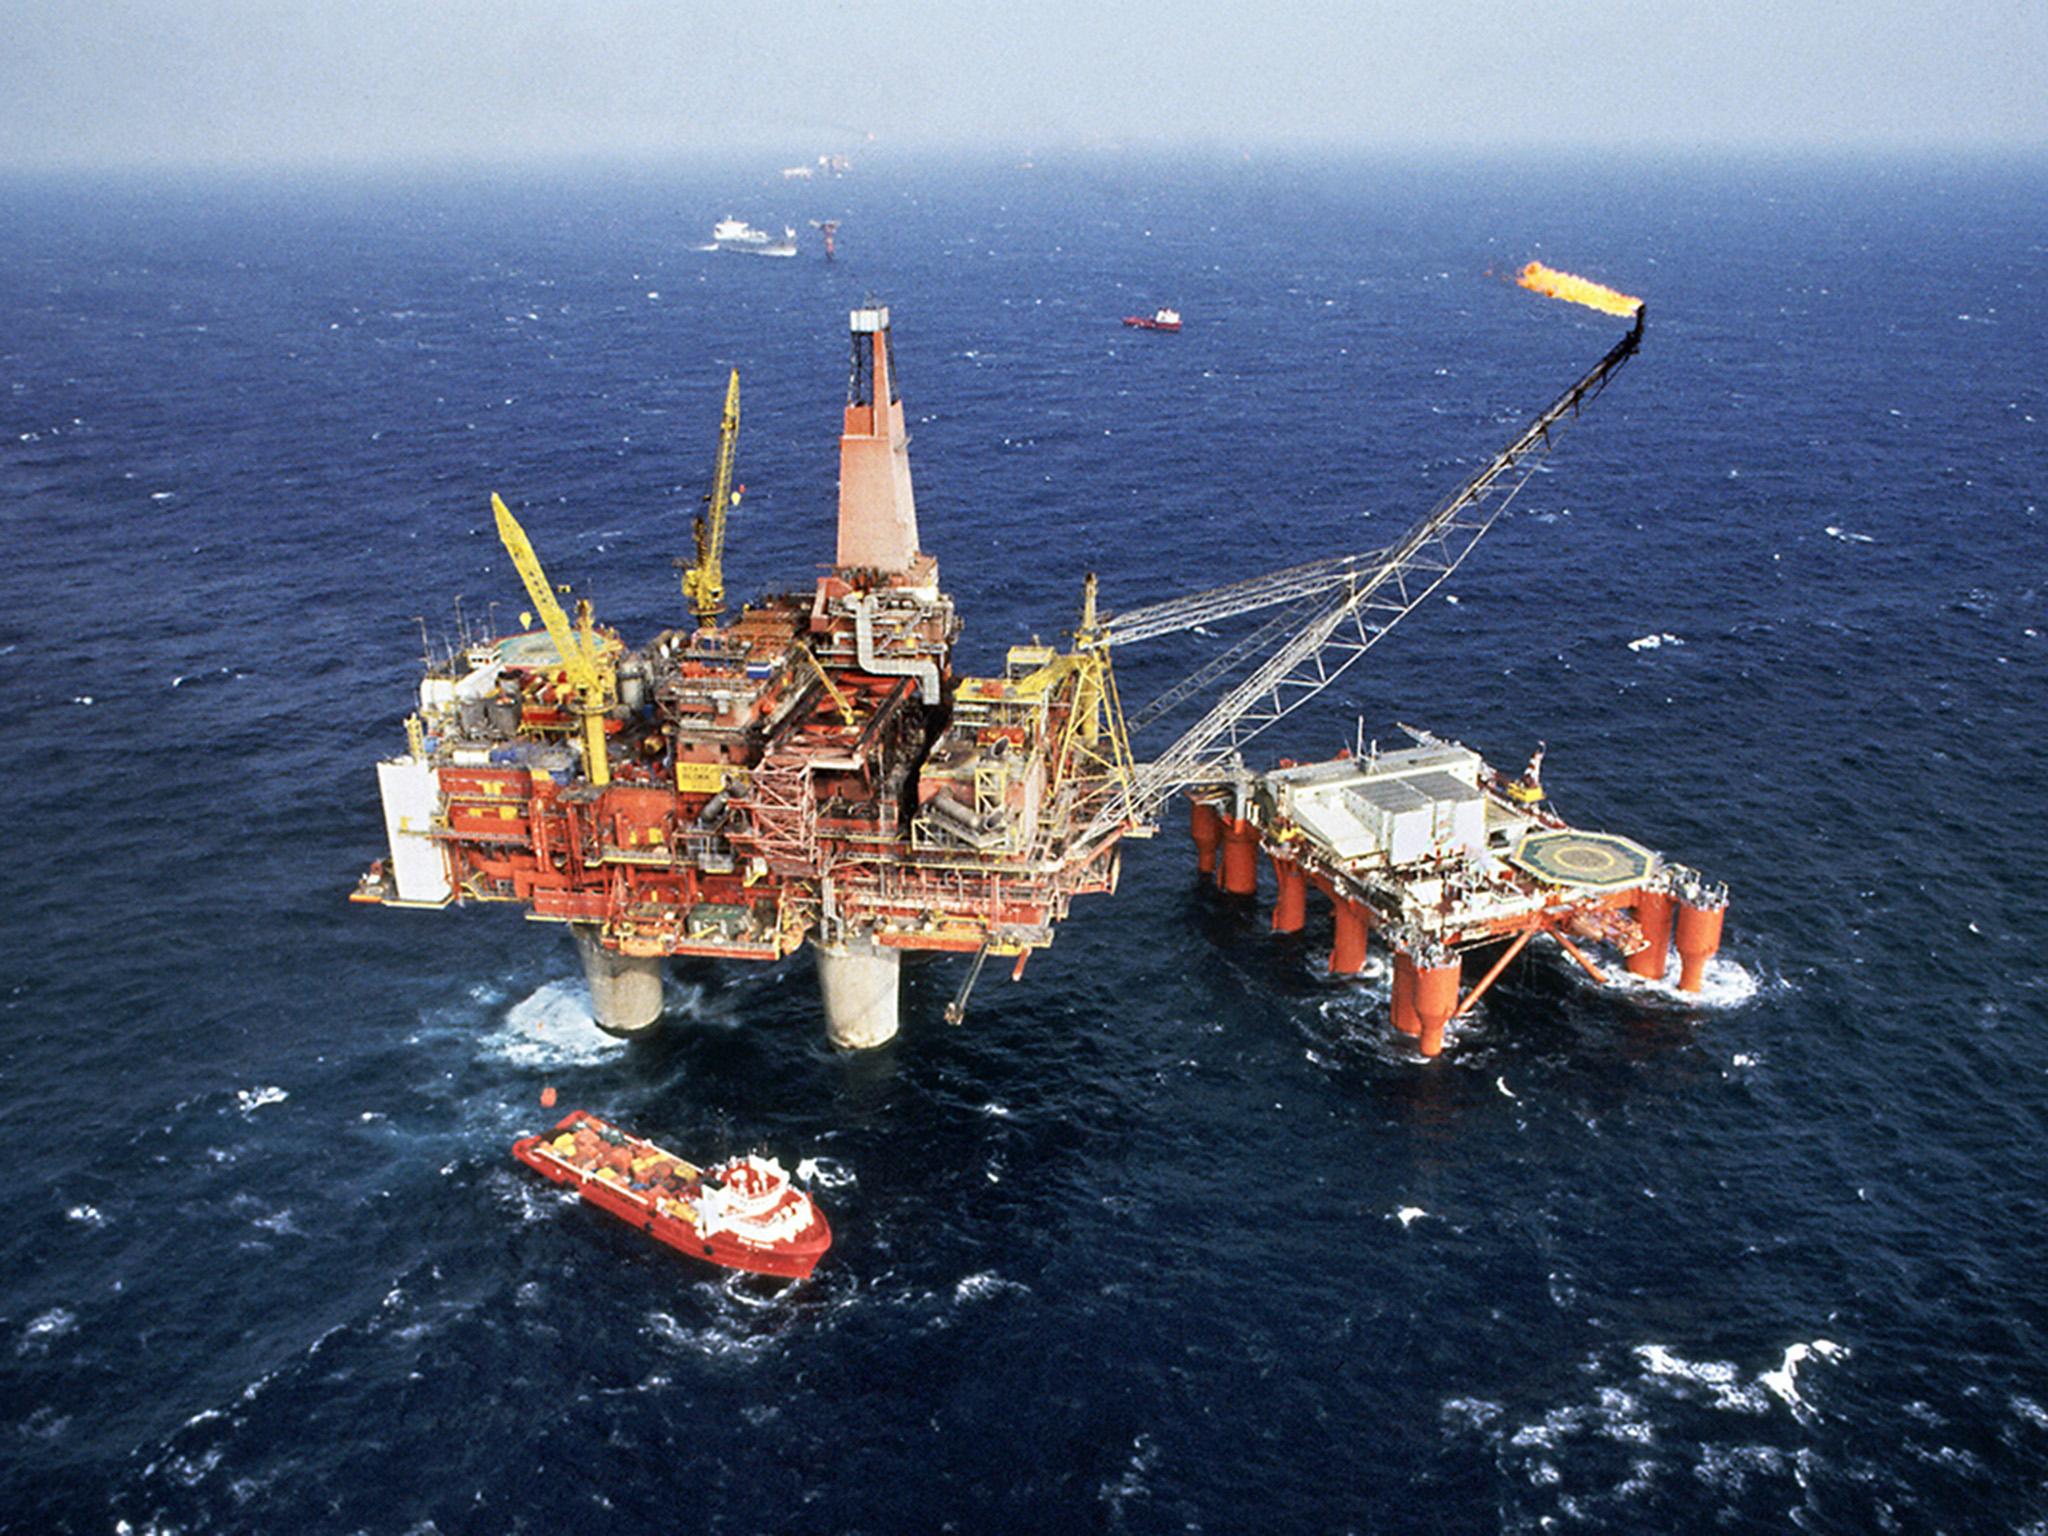 There was a shutdown at a major North Sea oil field in October